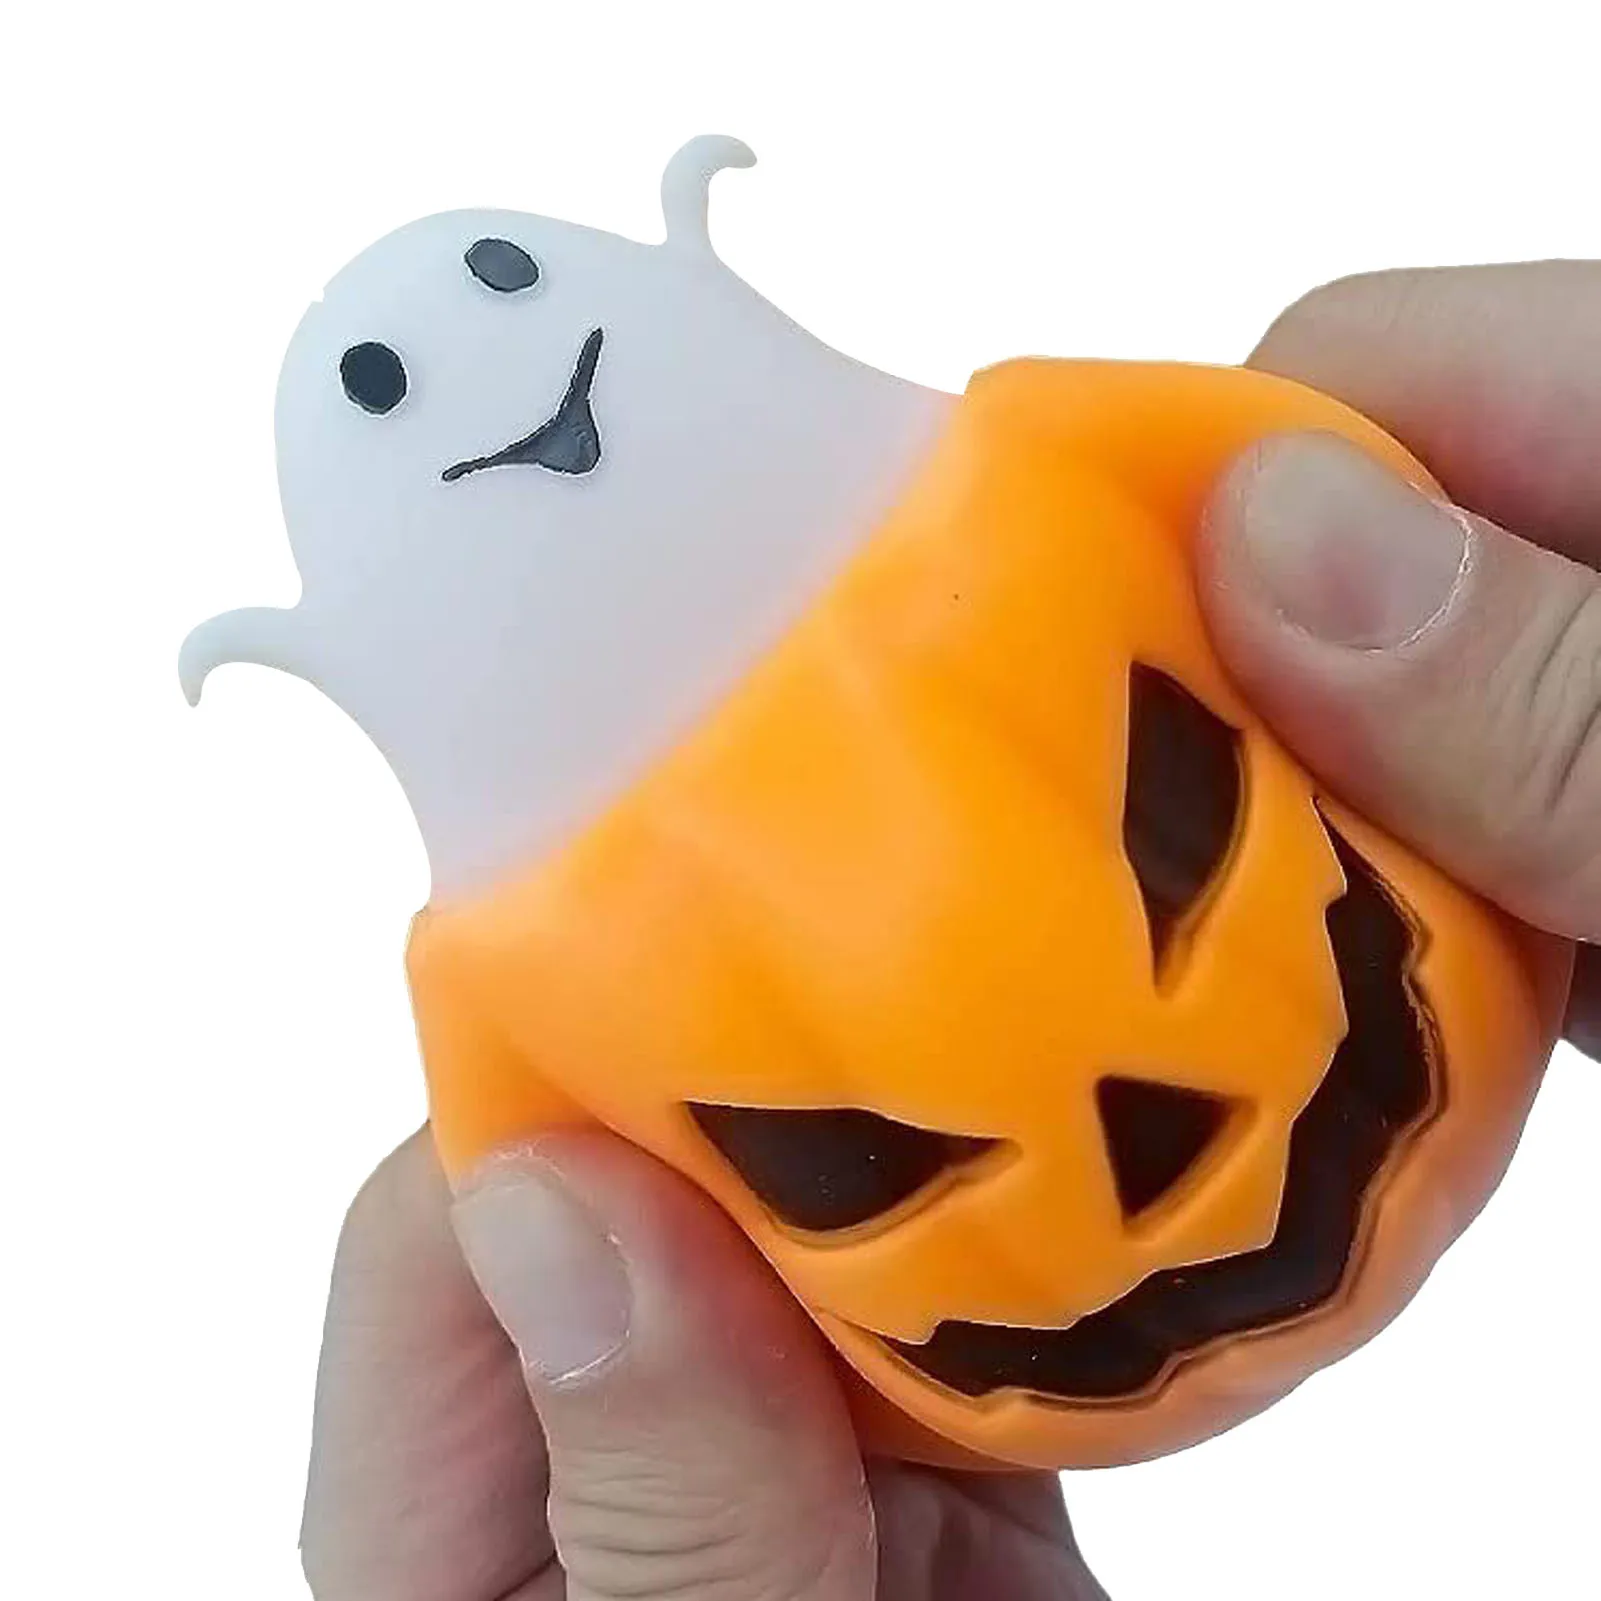 

Halloween Pumpkin Stress Ball Ghost Pumpkin Stress Balls Toys For Kids Decompression Toys For Stress Relief Party Favor Goody